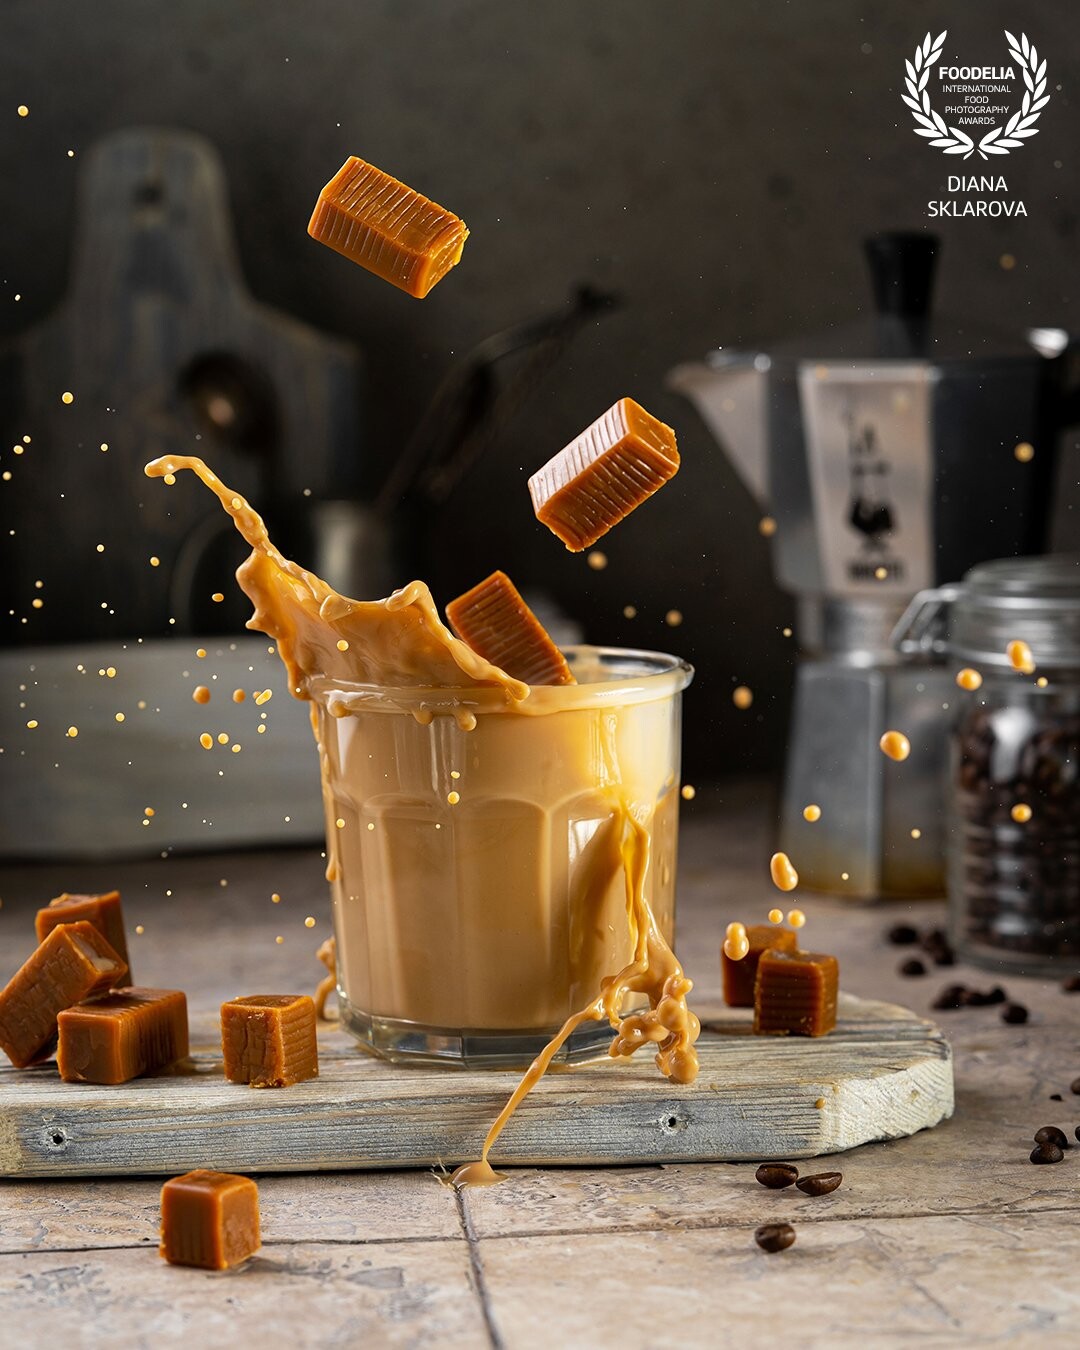 Toffee coffee splash with candy levitation with droplets in the air. Homemade delicious  dessert drink. Beautiful conceptual art photography